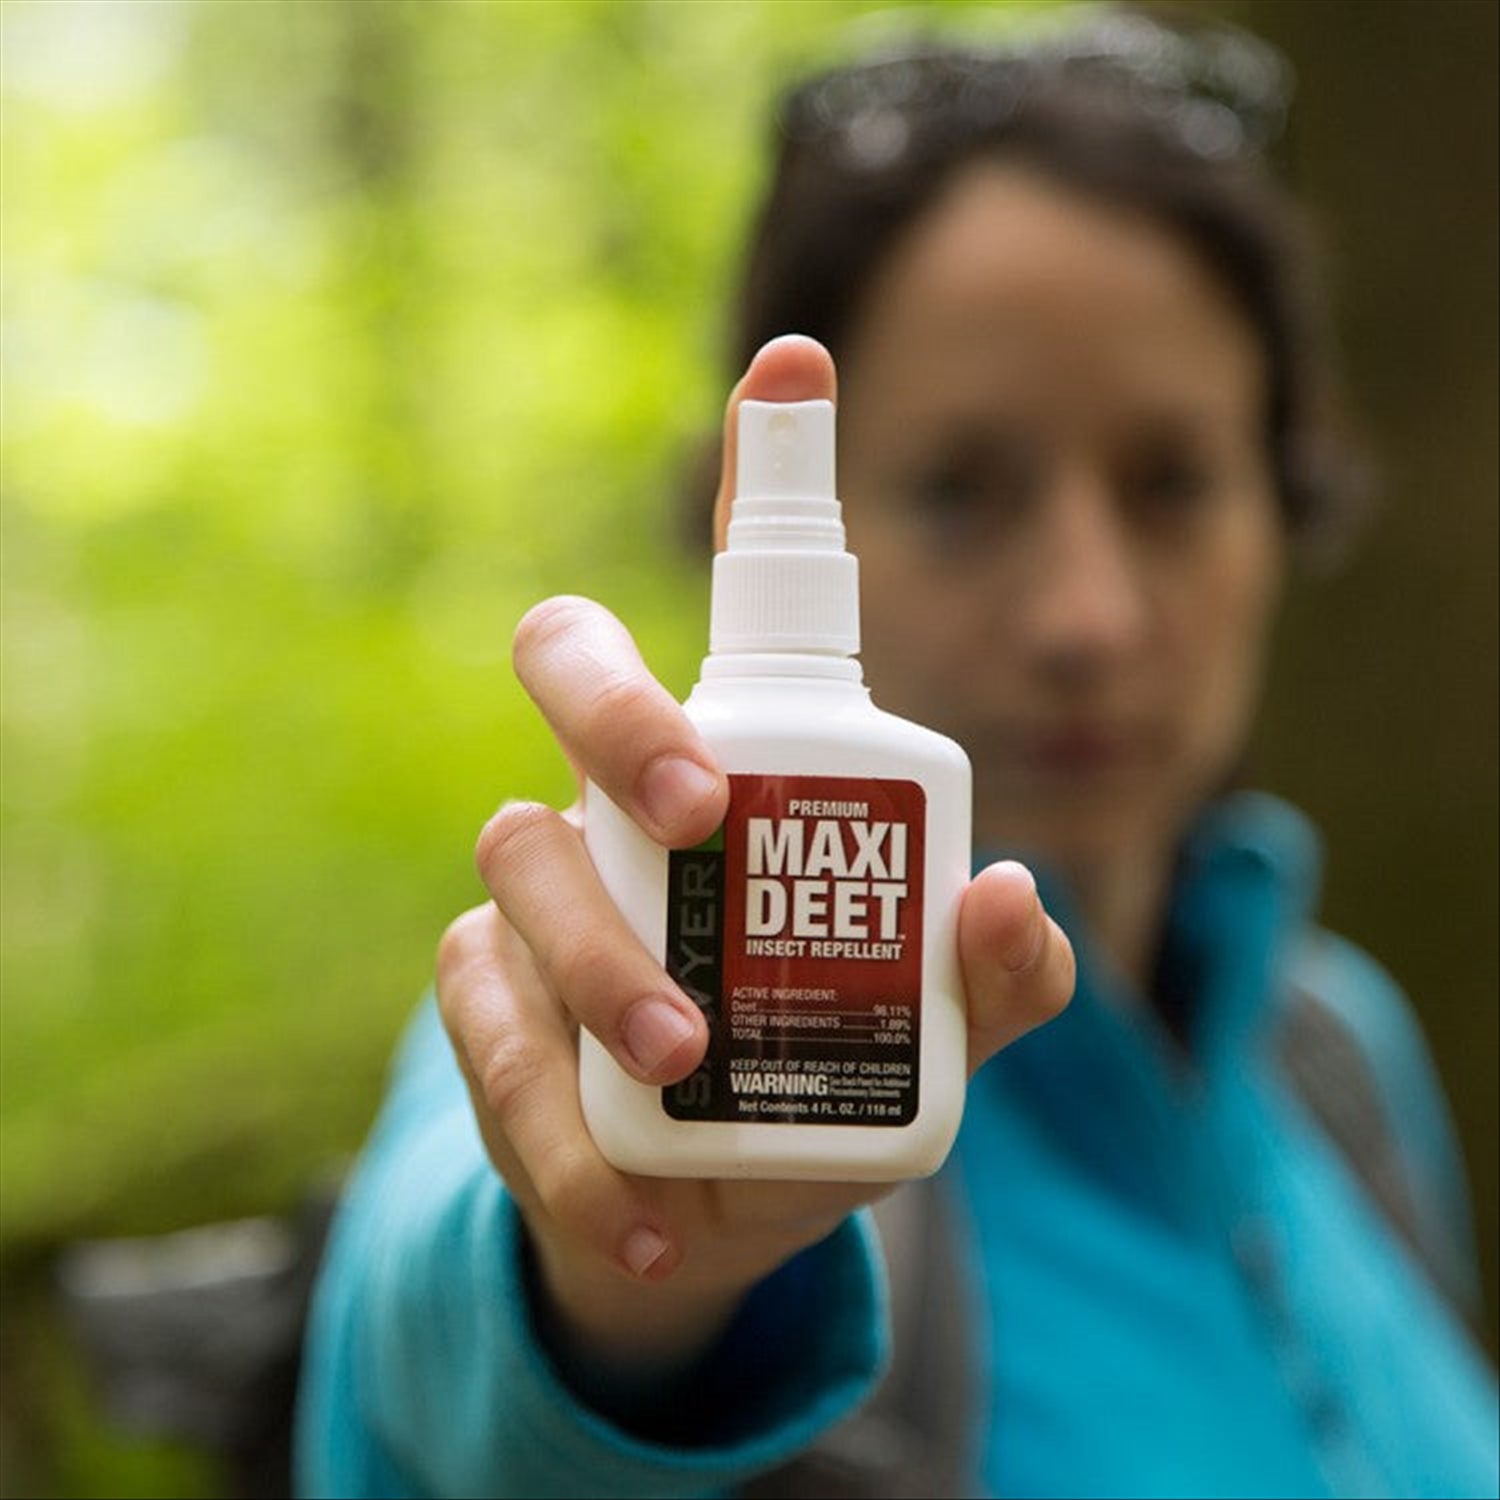 Sawyer Sawyer Maxi Deet Insect Repellent